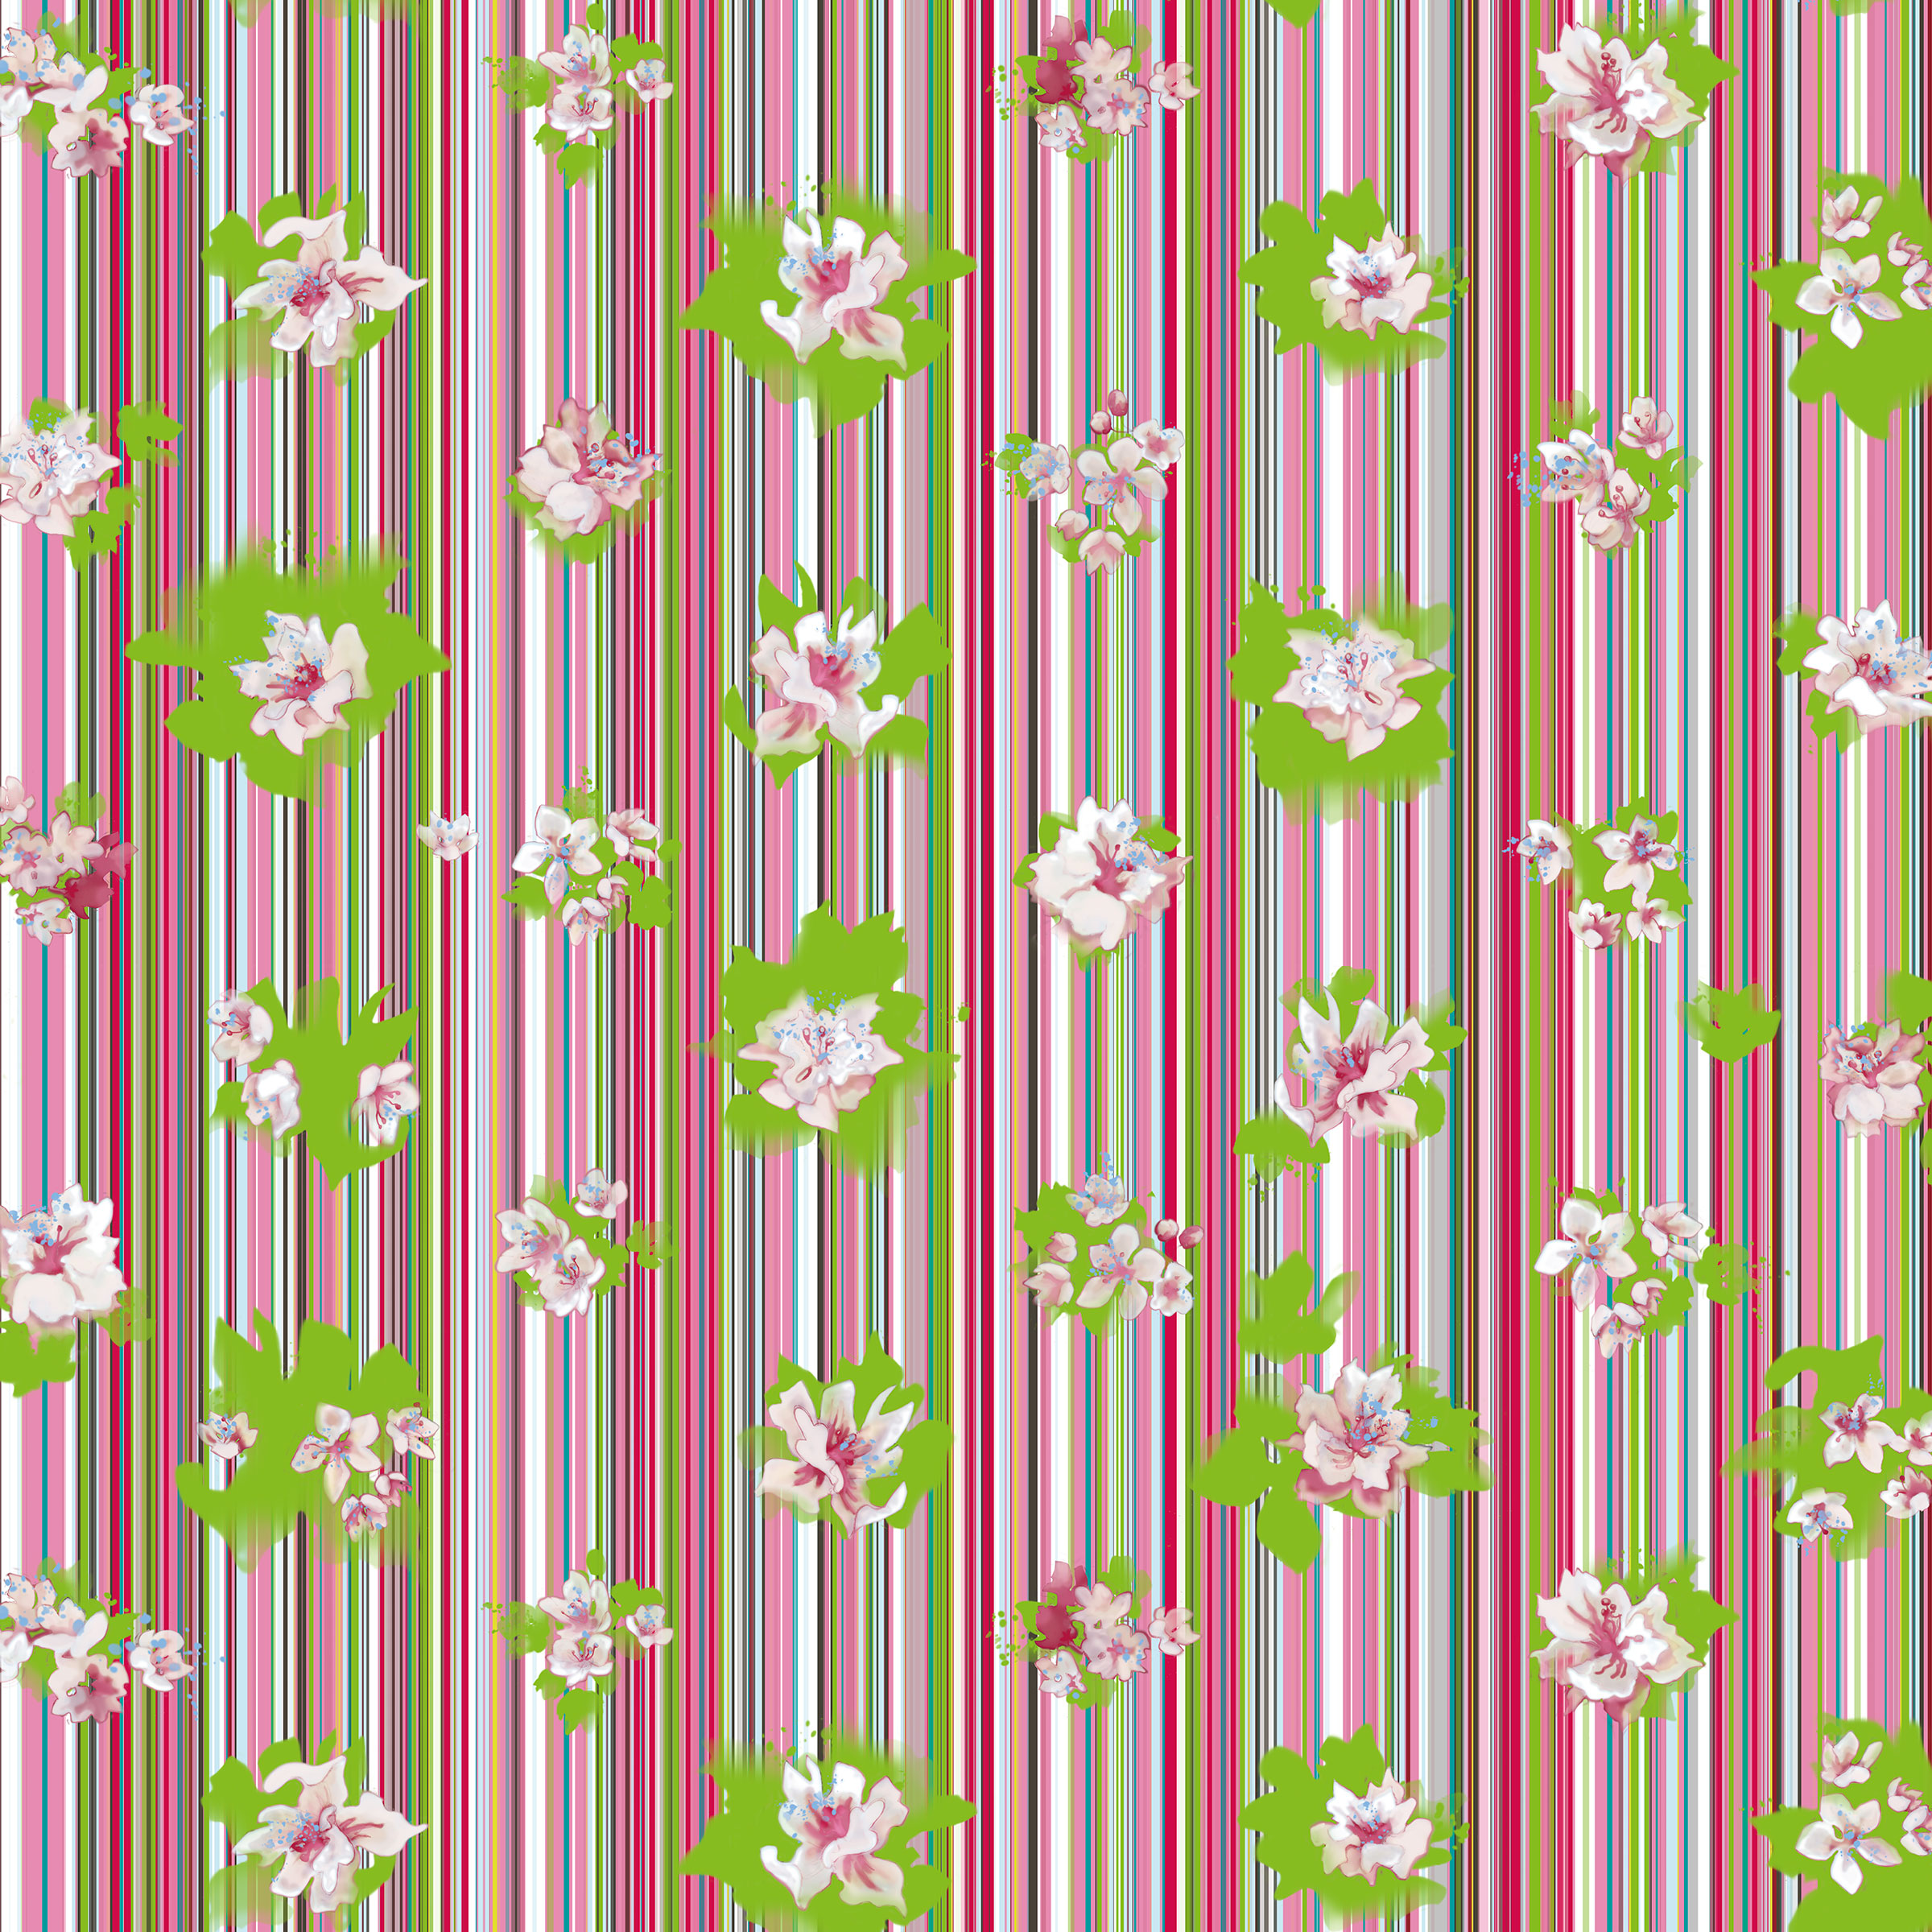 Spalliera, pattern design, stripe with flowers for upholstery and wallcovering.